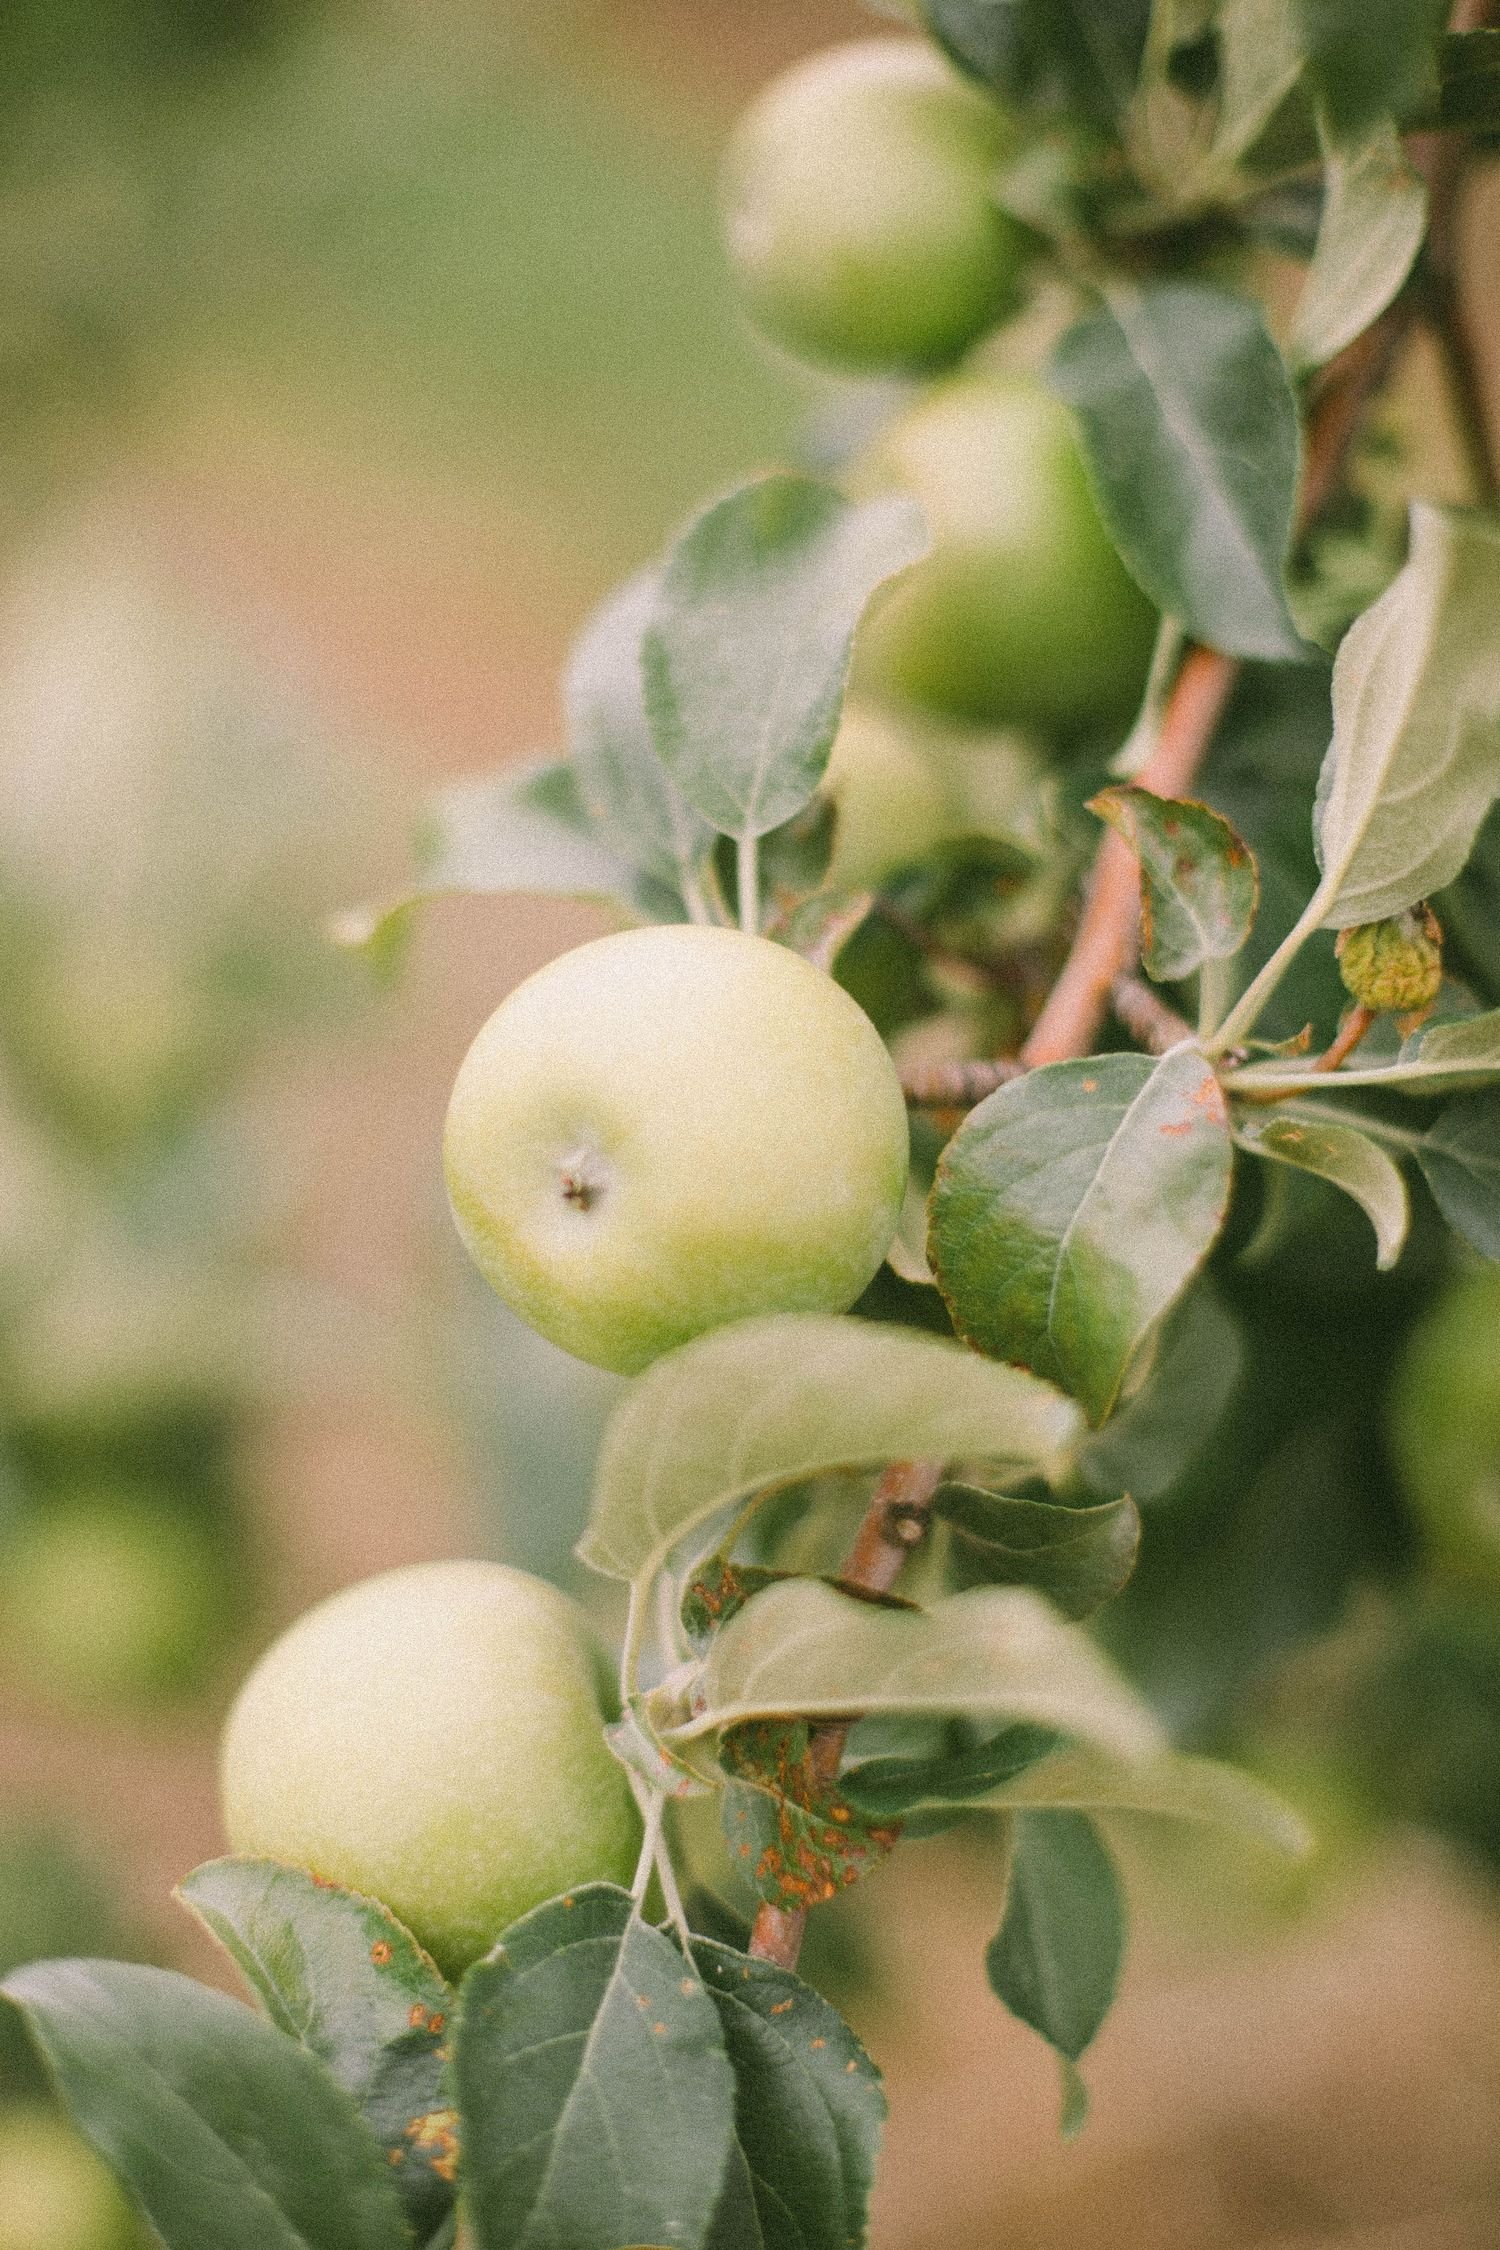 Brantview_Apples_and_Cider_Wedding_Venue_2_of_23-8ff8749e.jpg